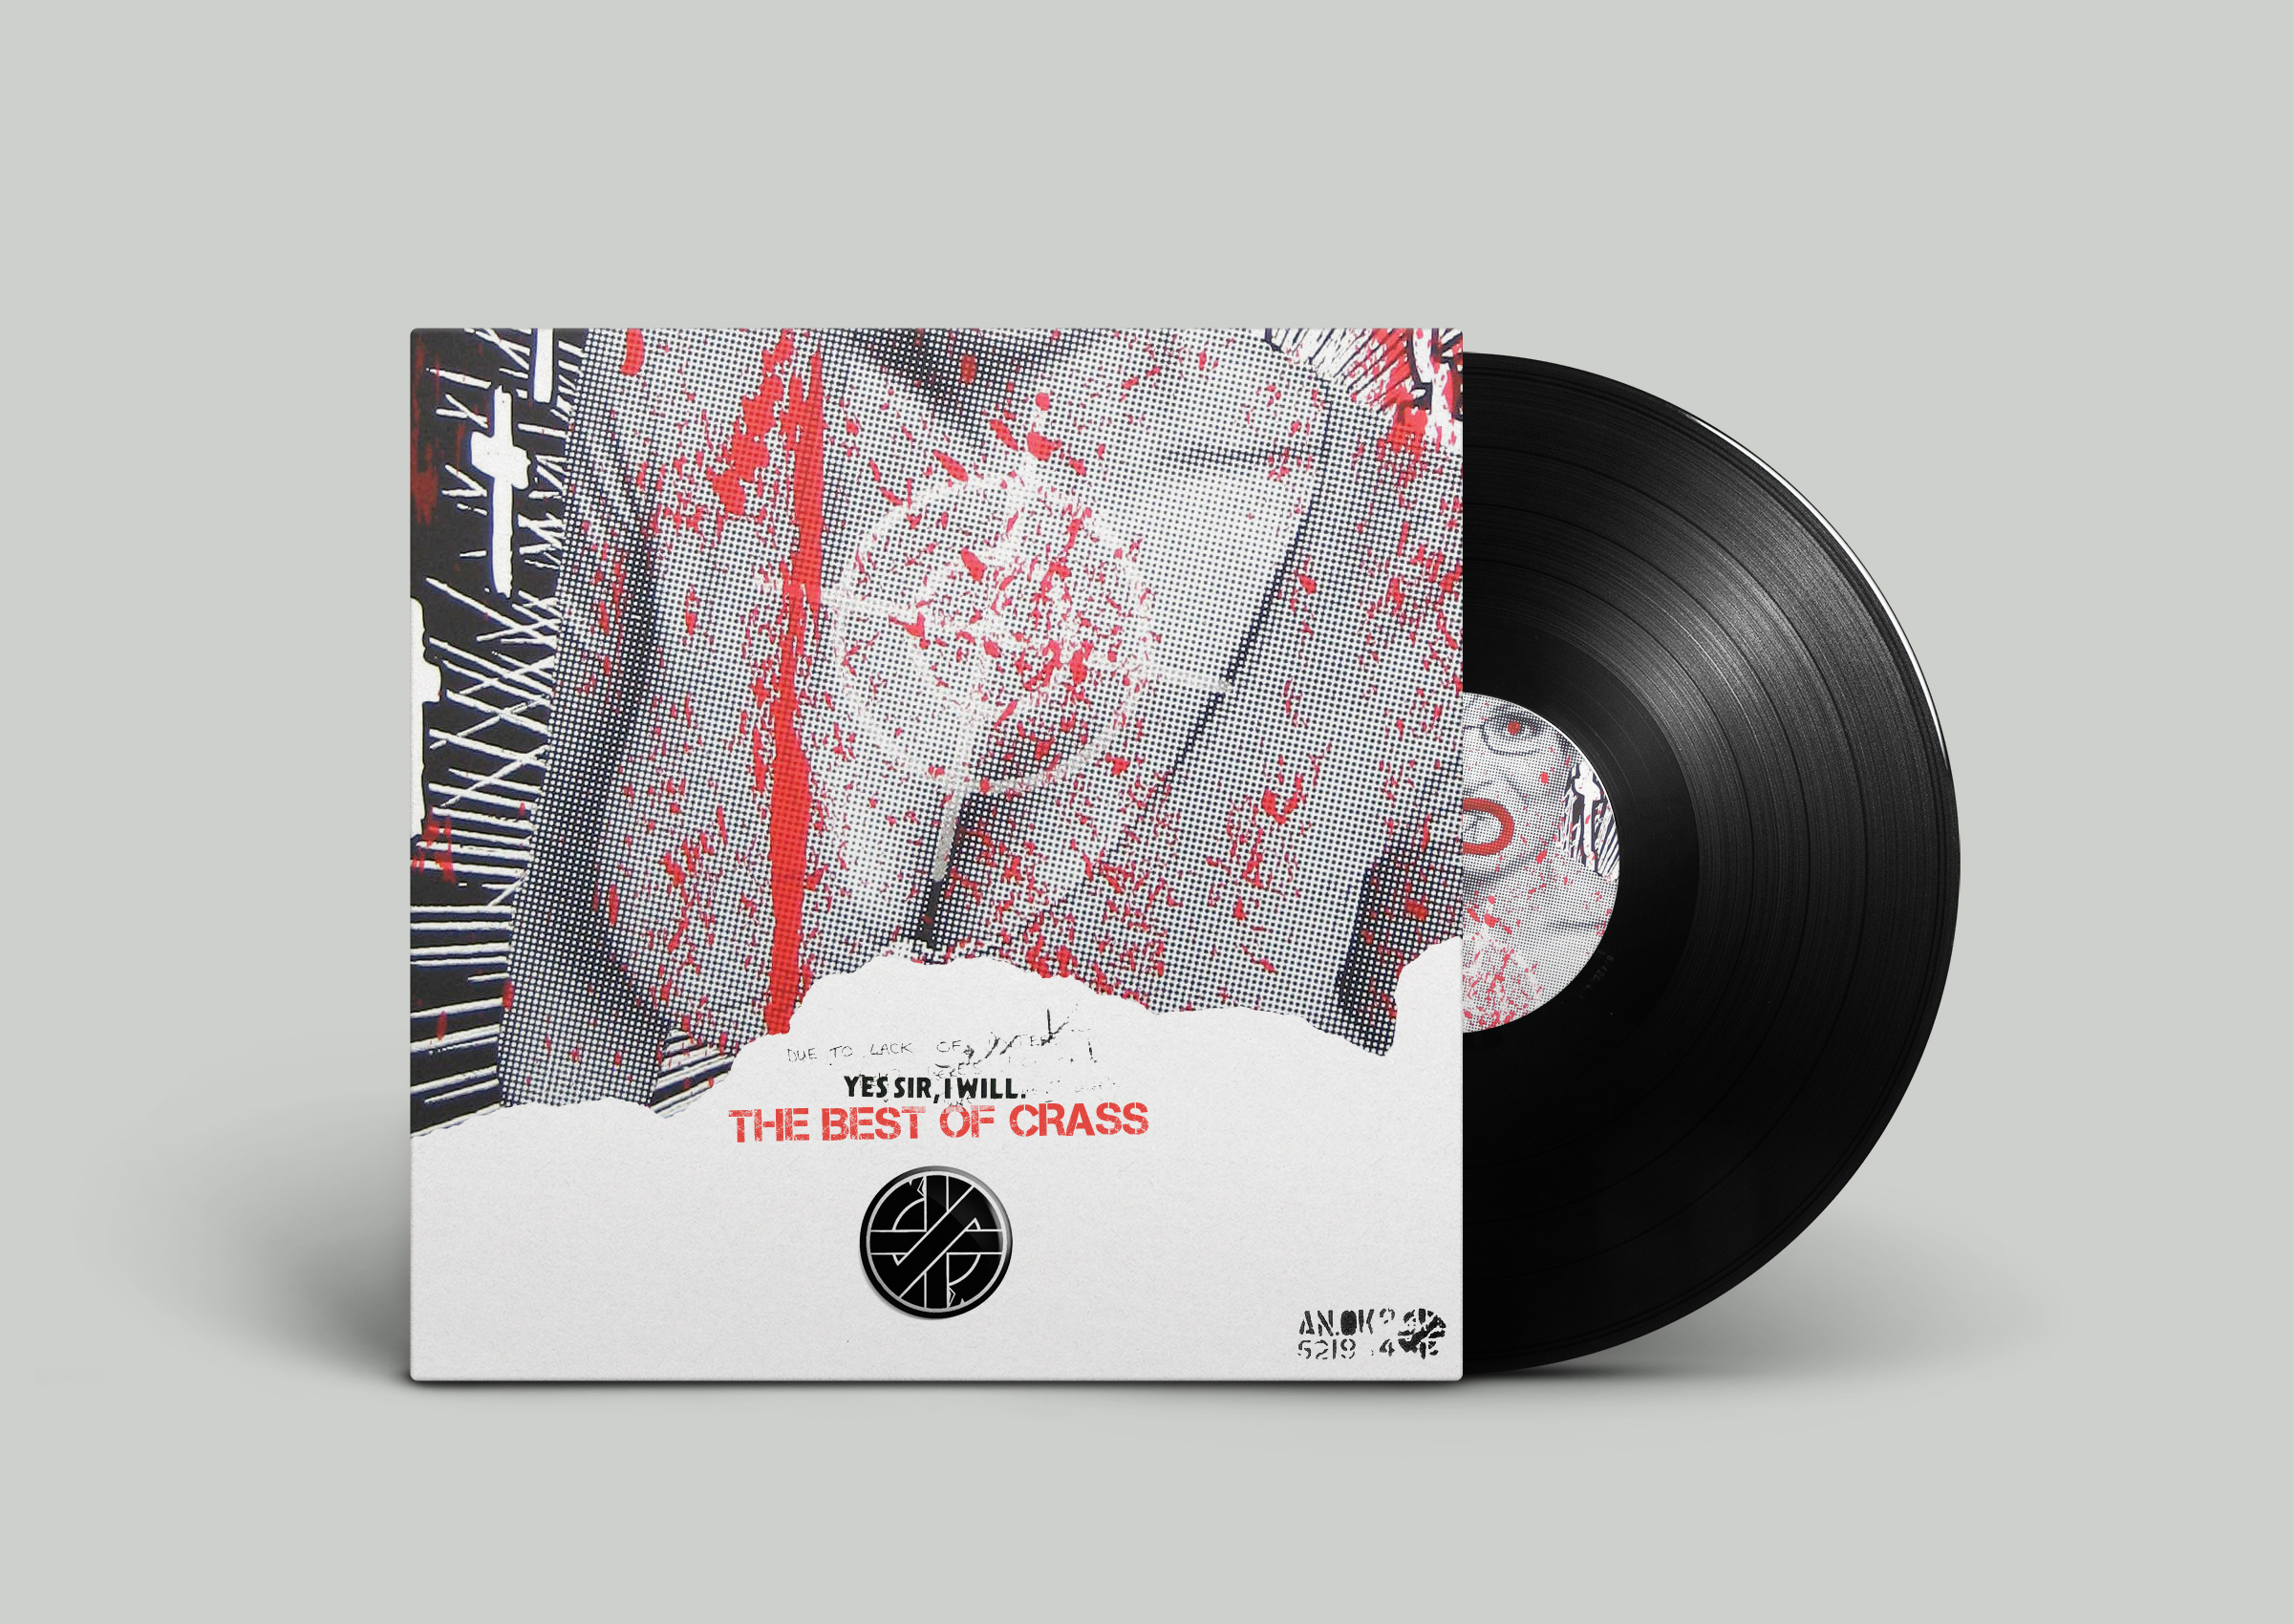 Crass (Yes Sir I Will) Album Concept by Phil Jones on Dribbble